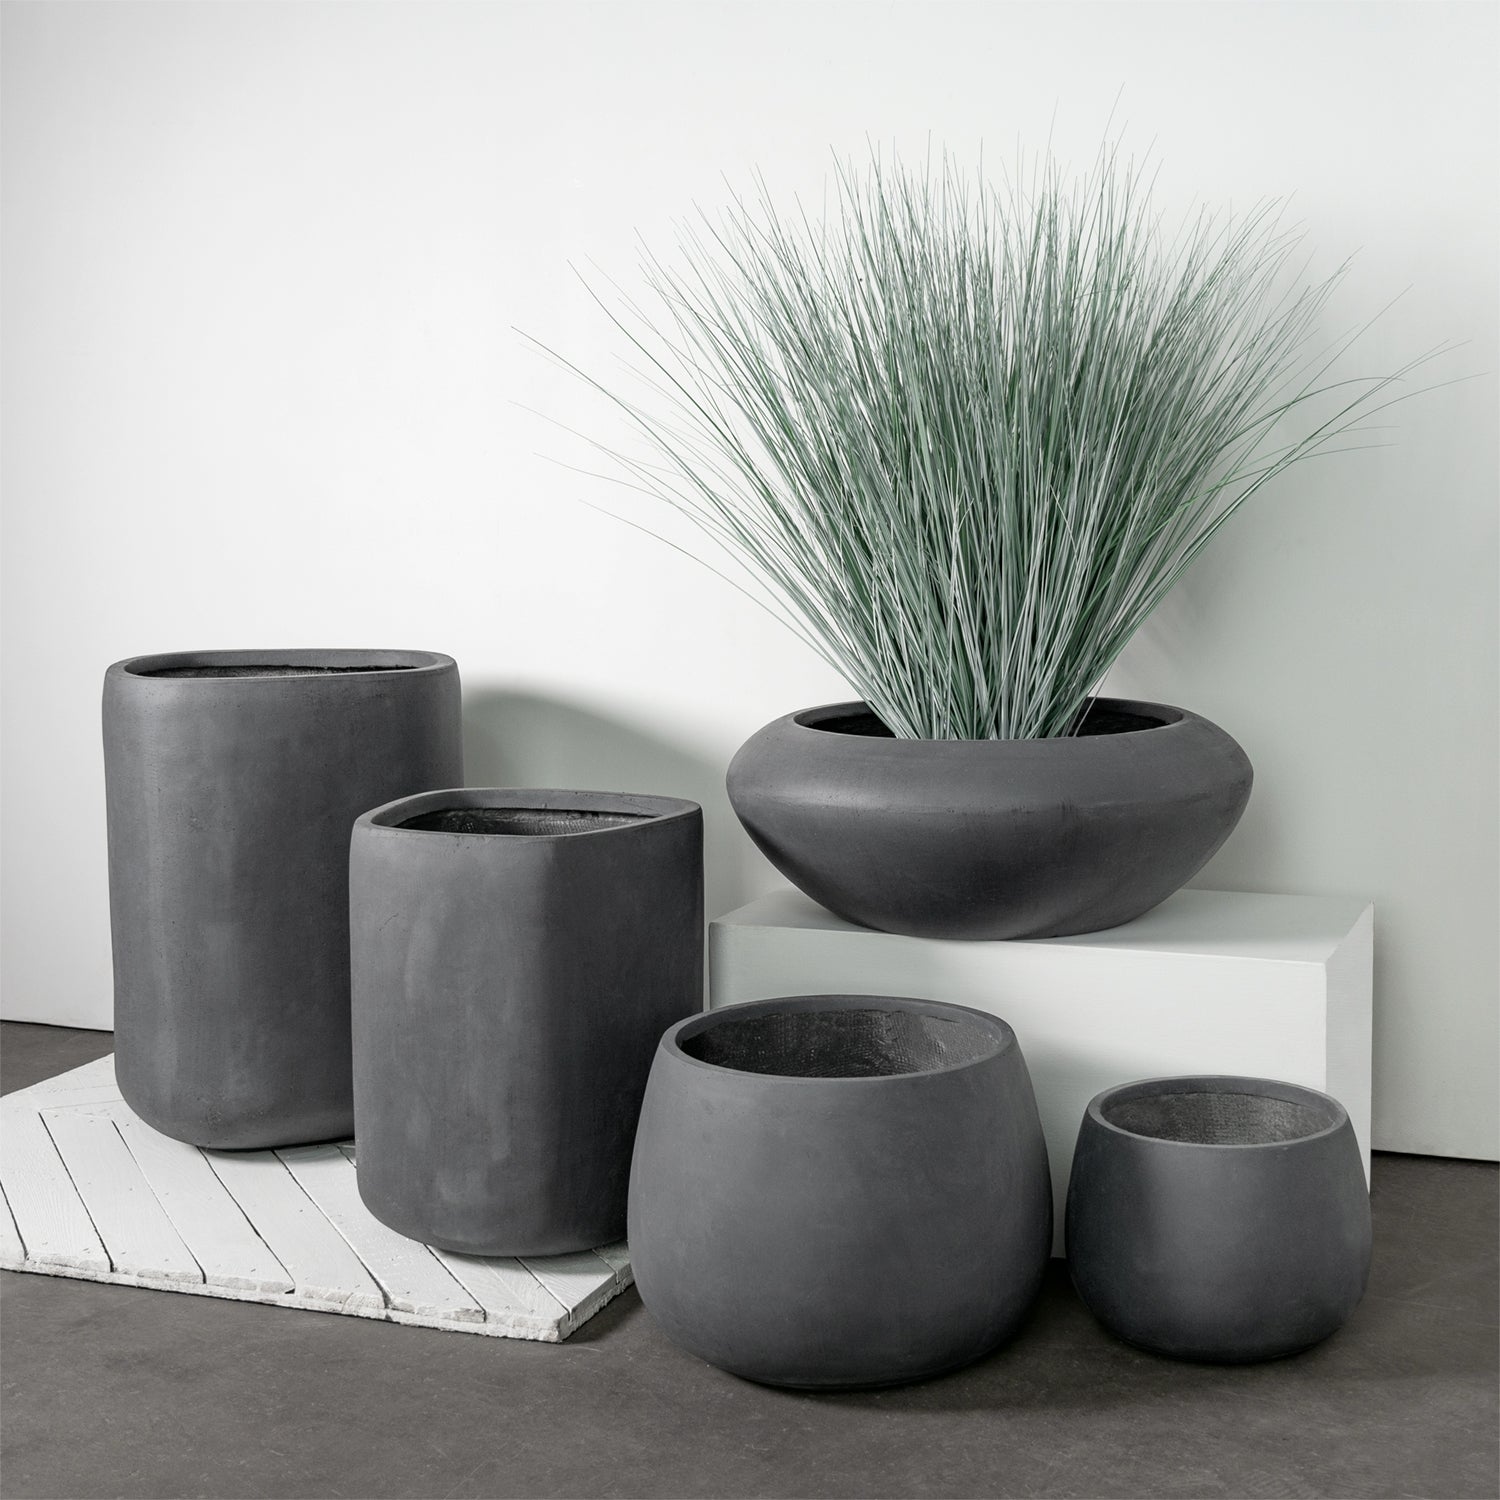 Distressed Smooth: Puddle Planter Grey, Set/ 2